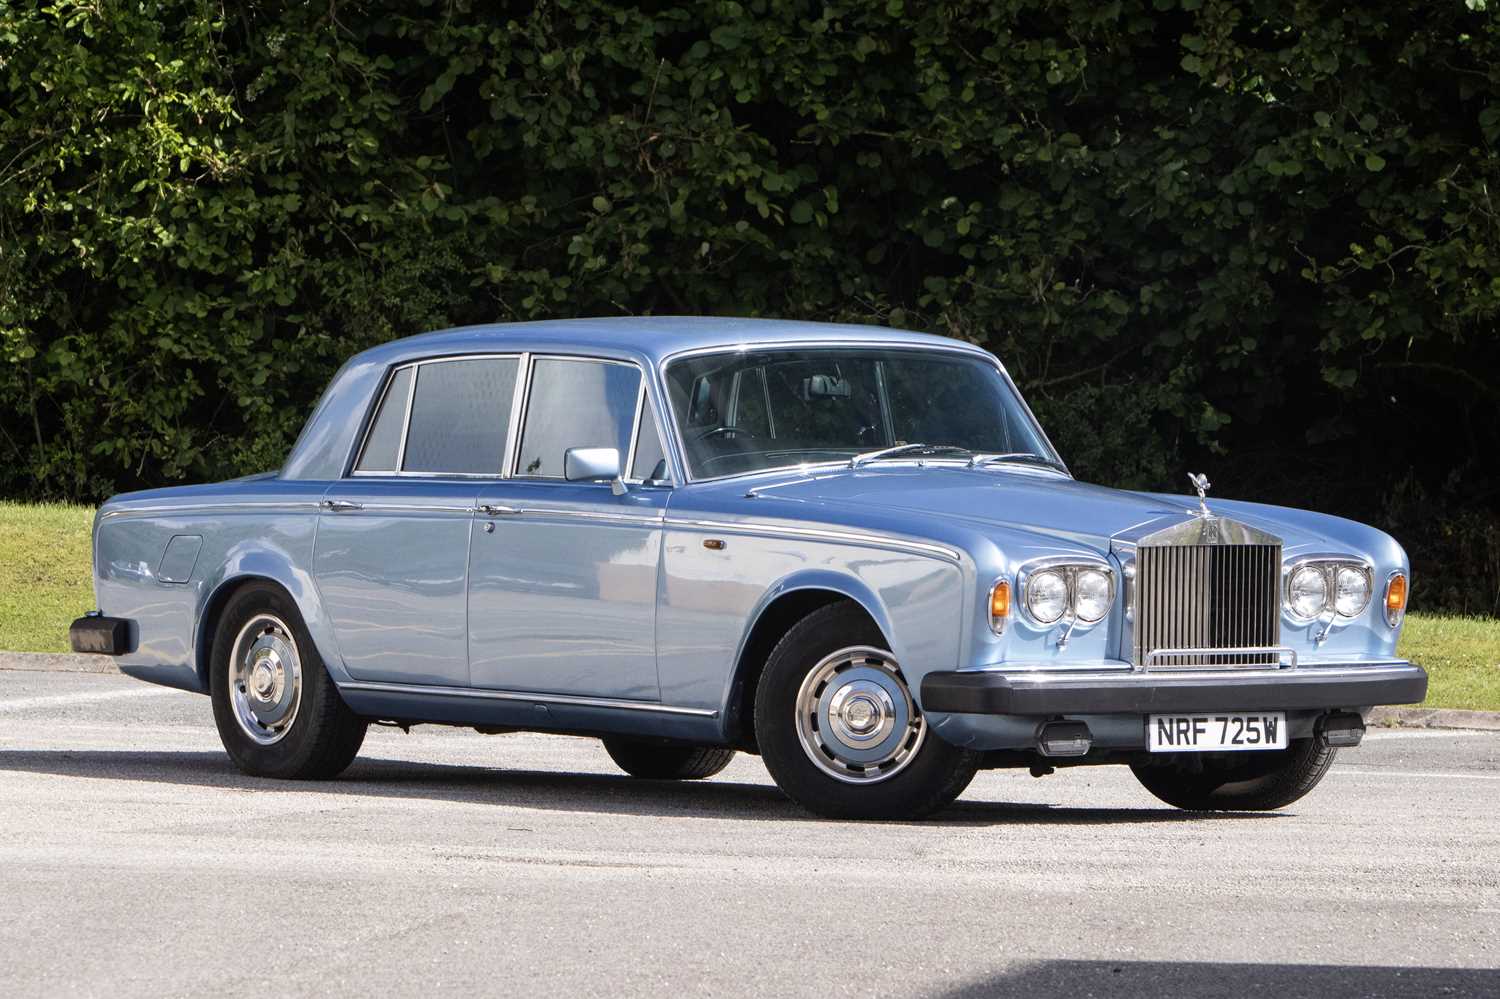 Rolls-Royce Silver Shadow, Its Models, Features & More